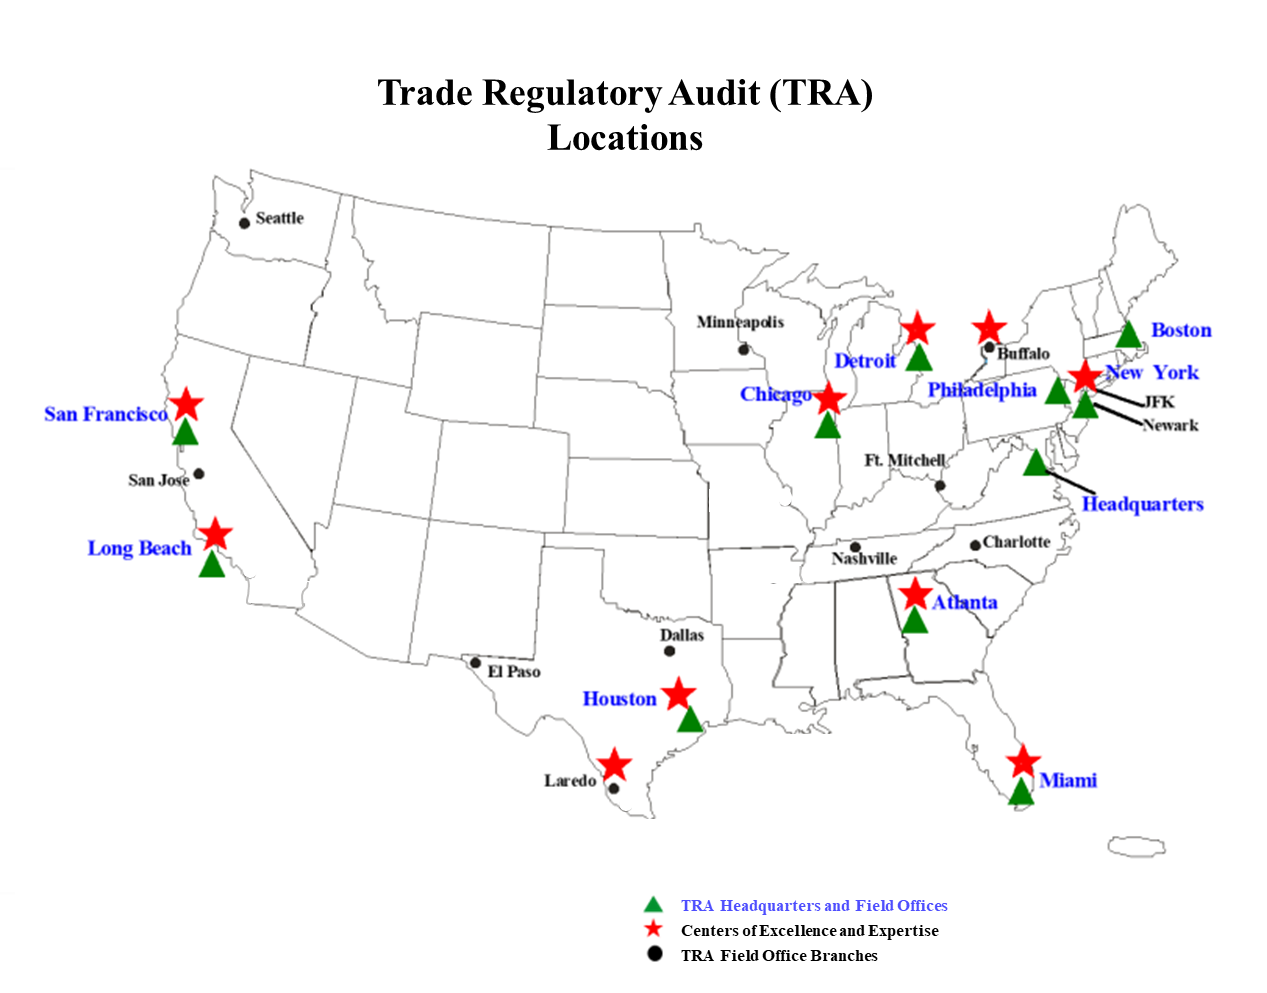 Locations of the Trade Regulatory Audit Offices